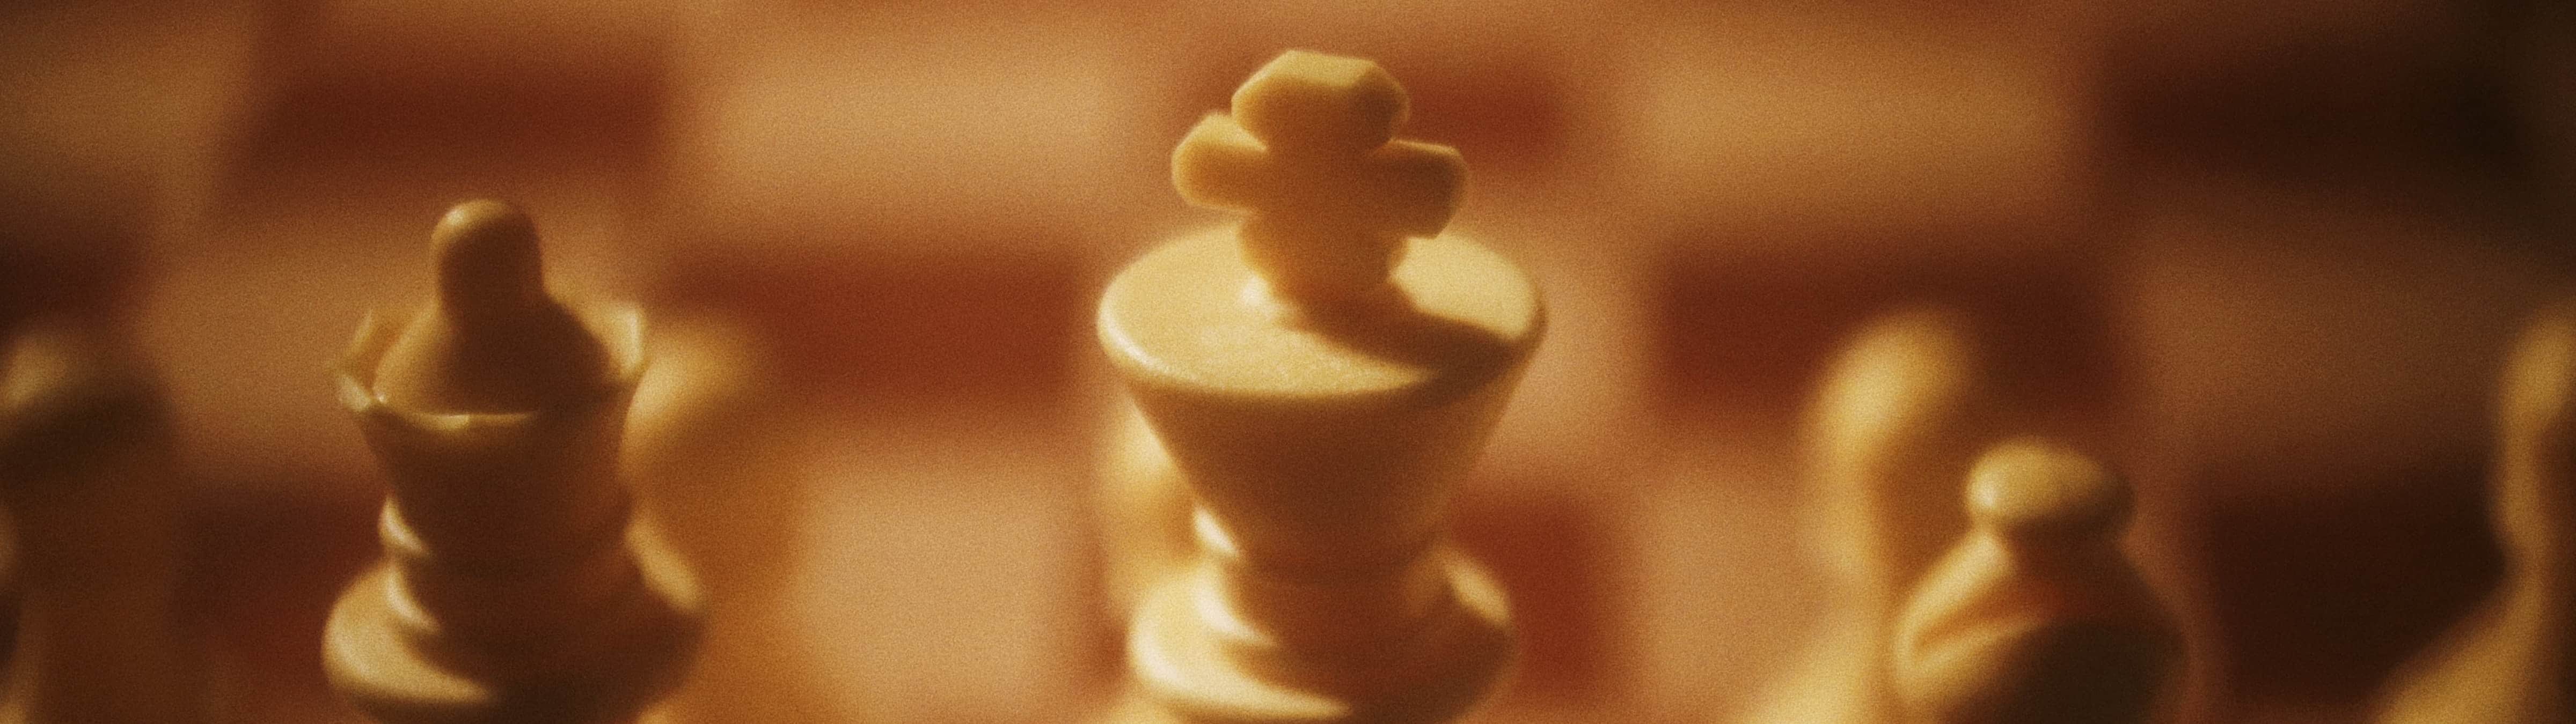 Close-up view of chess pieces, with a king in focus, illustrating strategic thinking and competition